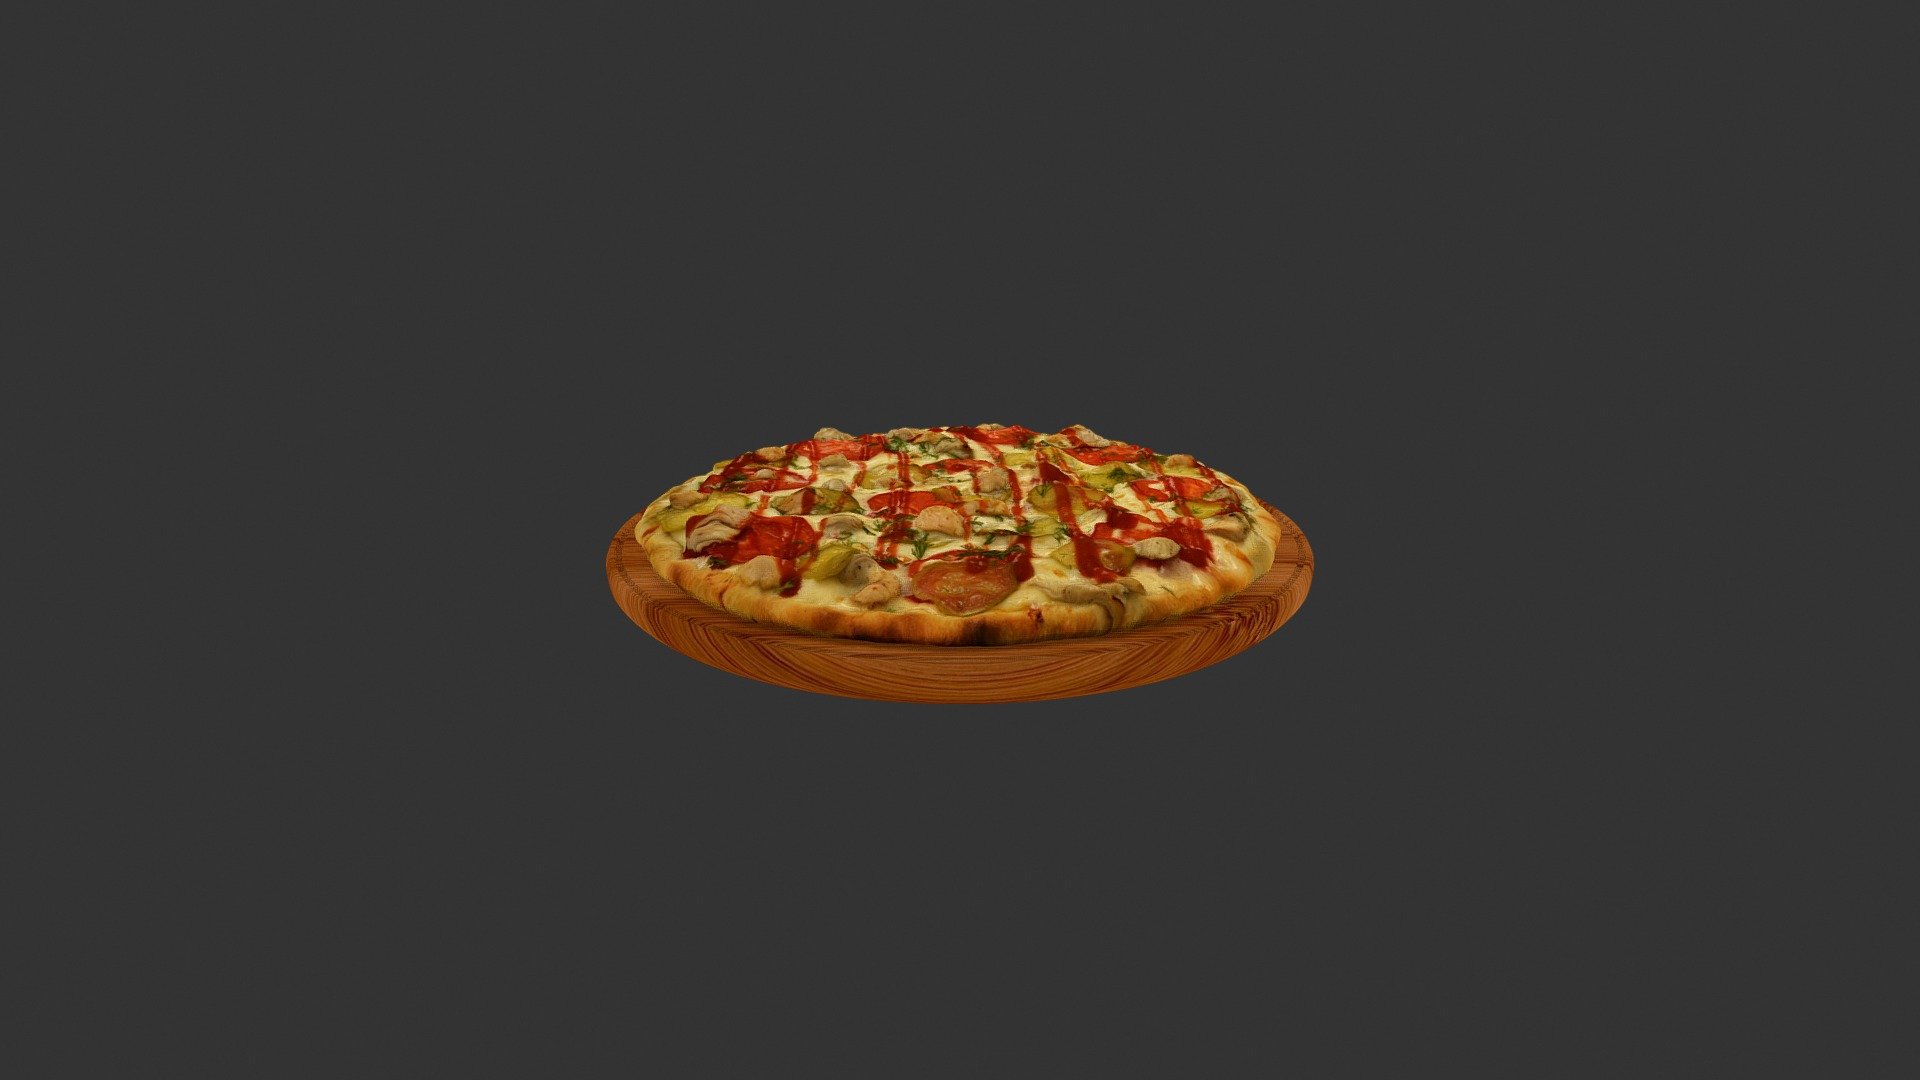 Піца Карні біаче (ketchup_tomatoes_meat_pizza) - 3D model by alex.alexandrov.a 3d model